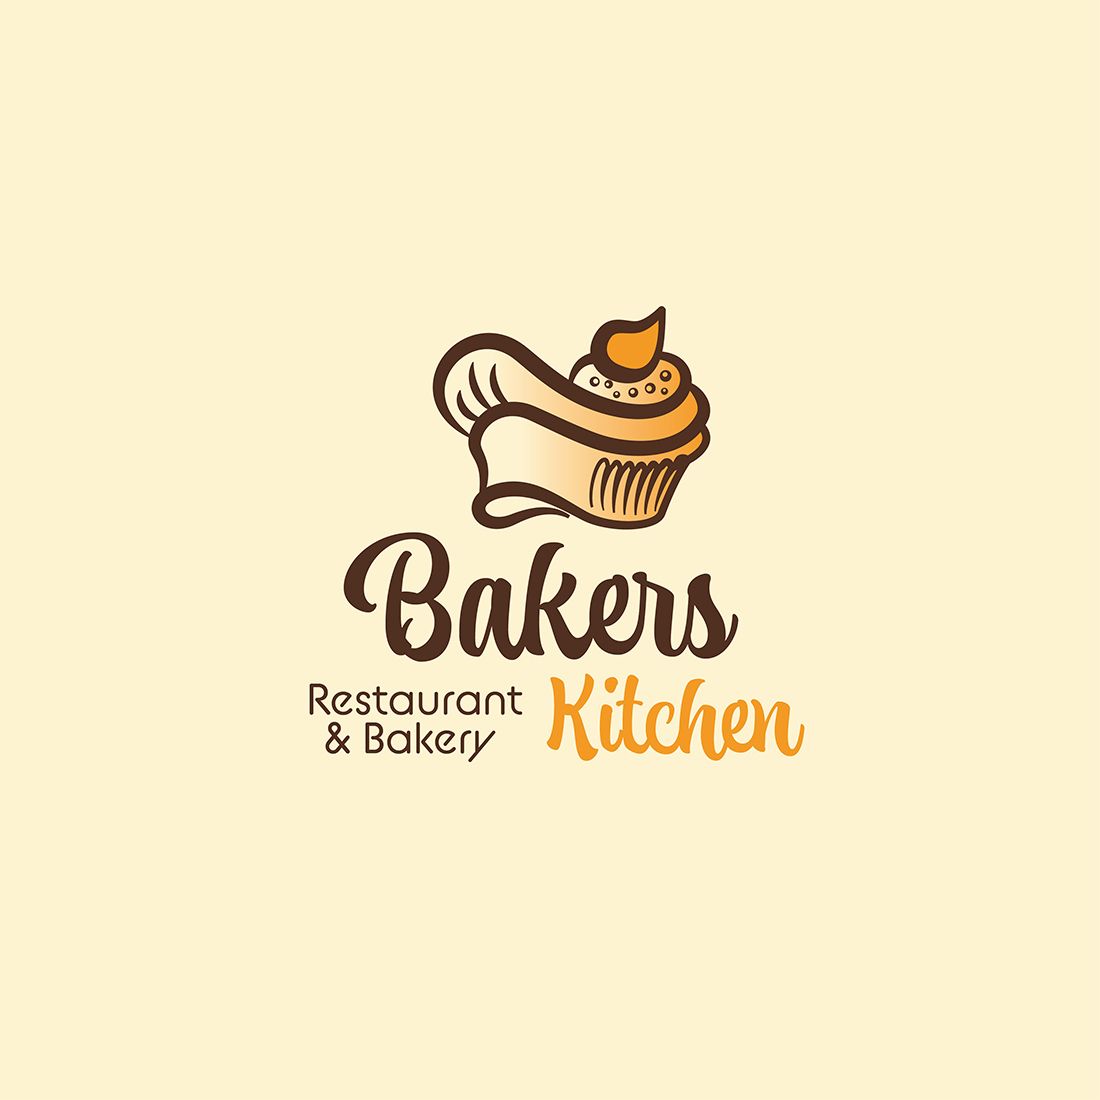 Bakers Kitchen Logo for your projects.